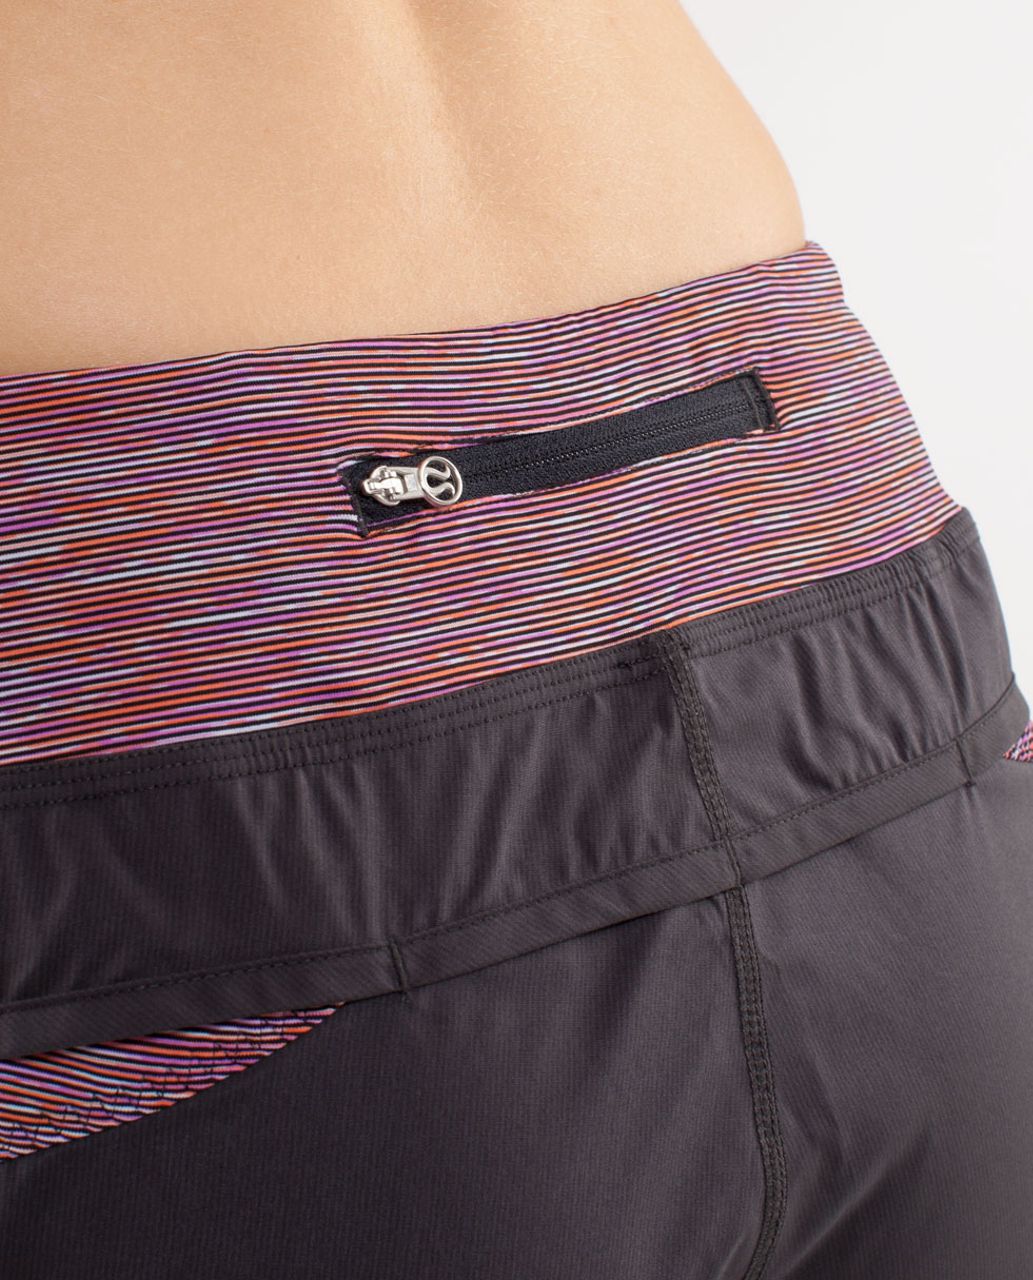 Lululemon Run:  Travel To Track Pant - Deep Coal /  Wee Are From Space Black March Multi